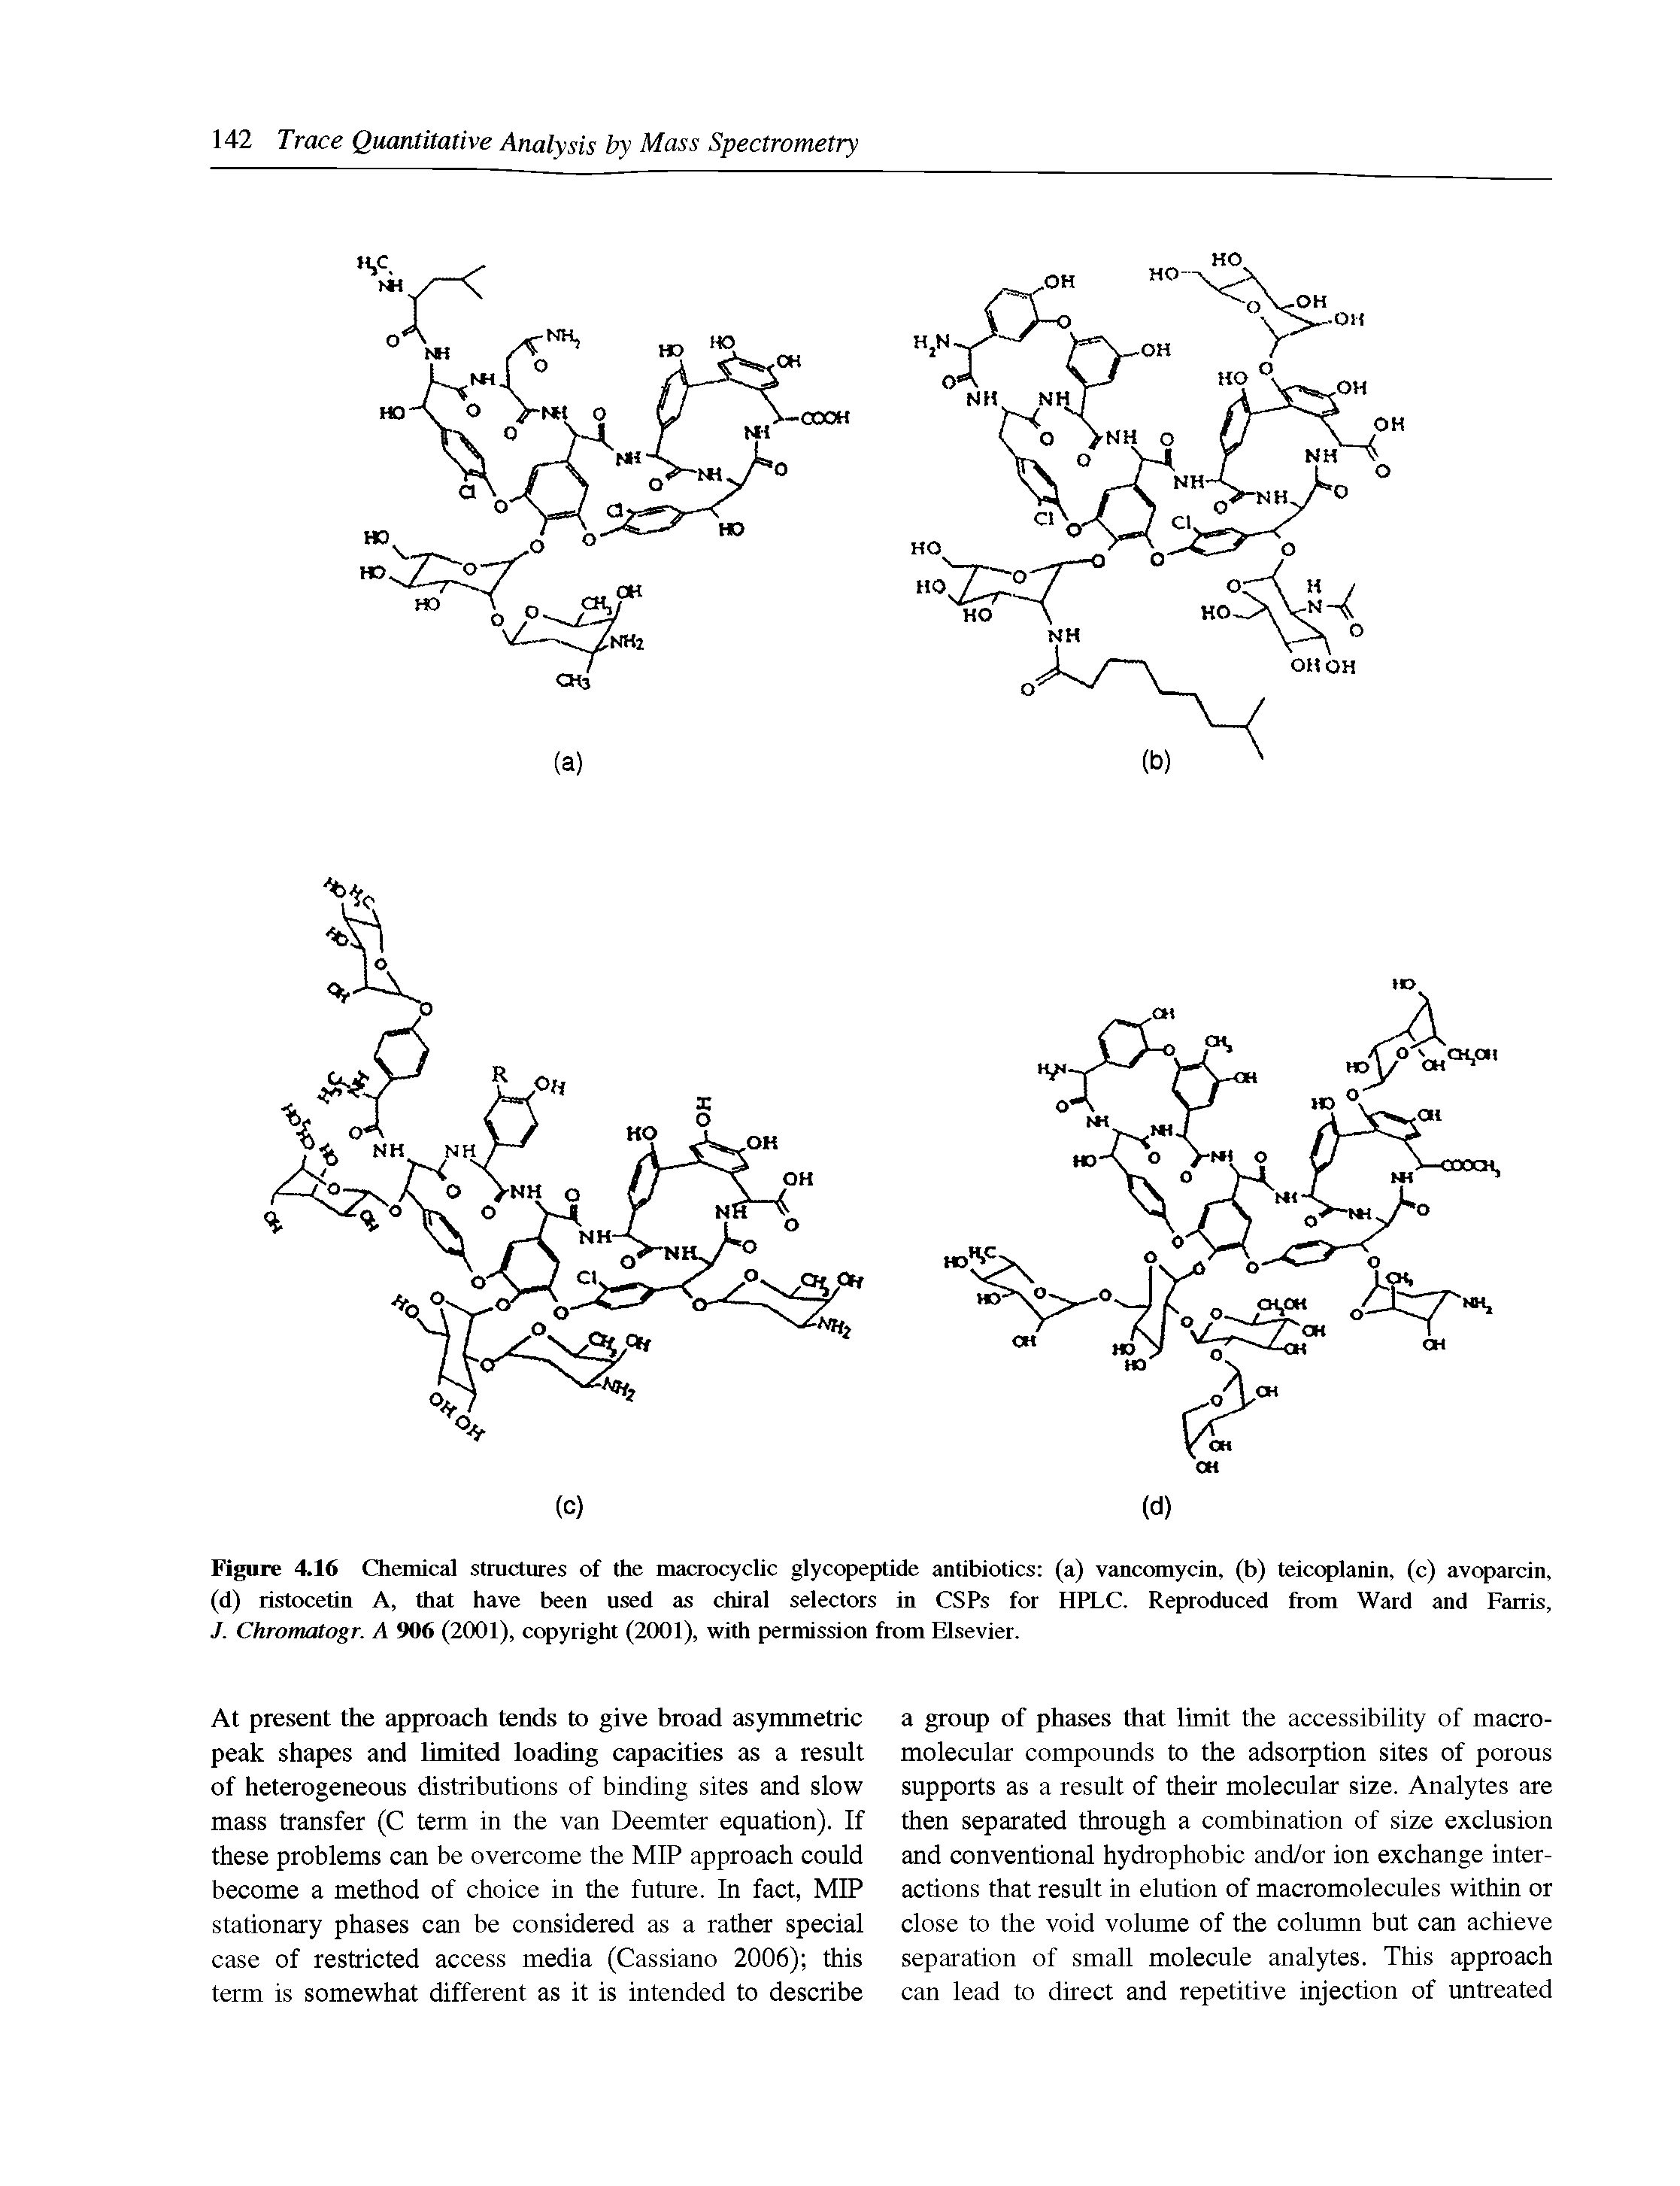 Figure 4.16 Chemical structures of the macrocyclic glycopeptide antibiotics (a) vancomycin, (b) teicoplanin, (c) avoparcin, (d) ristocetin A, that have been used as chiral selectors in CSPs for HPLC. Reproduced from Ward and Farris, J. Chromatogr. A 906 (2001), copyright (2001), with permission from Elsevier.